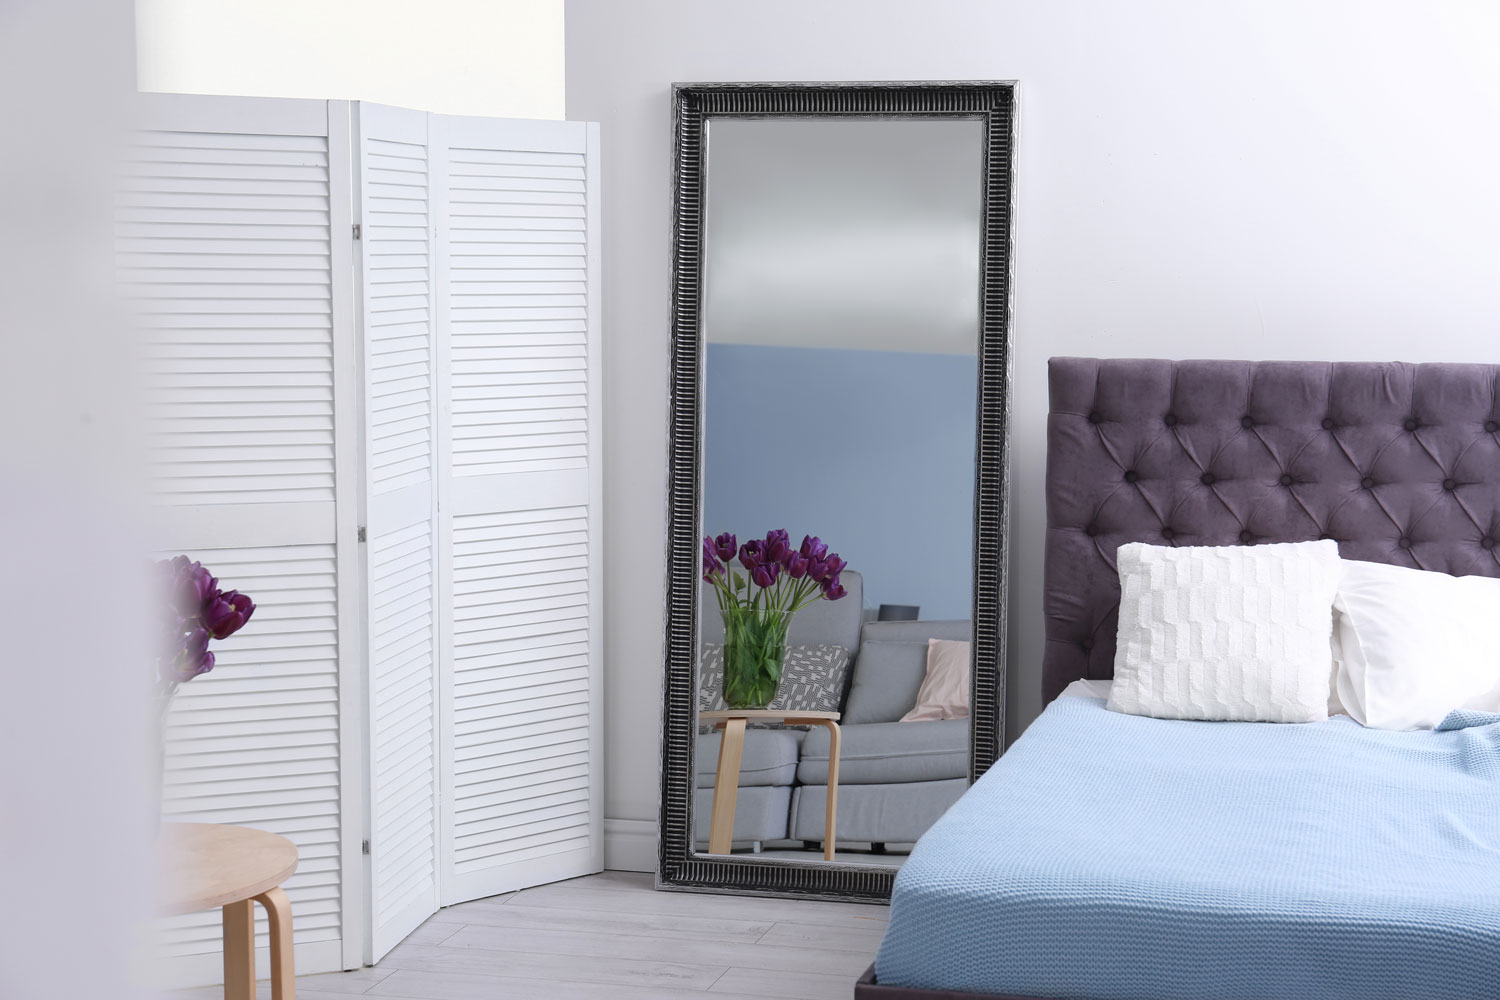 A standing mirror on the corner of the bedroom